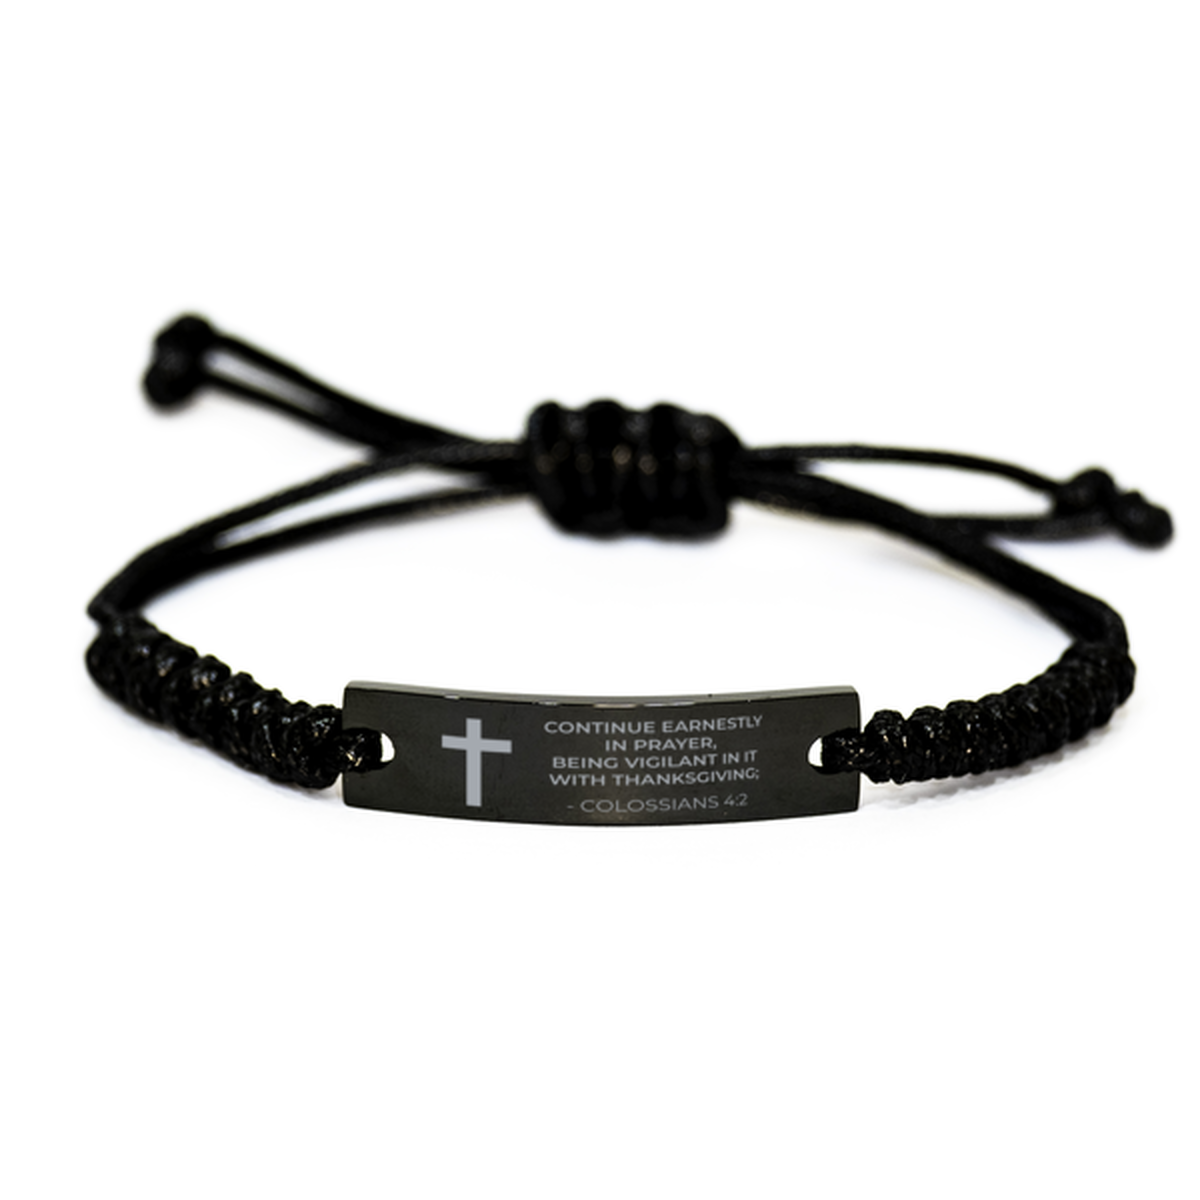 Bible Verse Rope Bracelet, Colossians 4:2 Continue Earnestly In Prayer, Being Vigilant, Christian Encouraging Gifts For Men Women Boys Girls